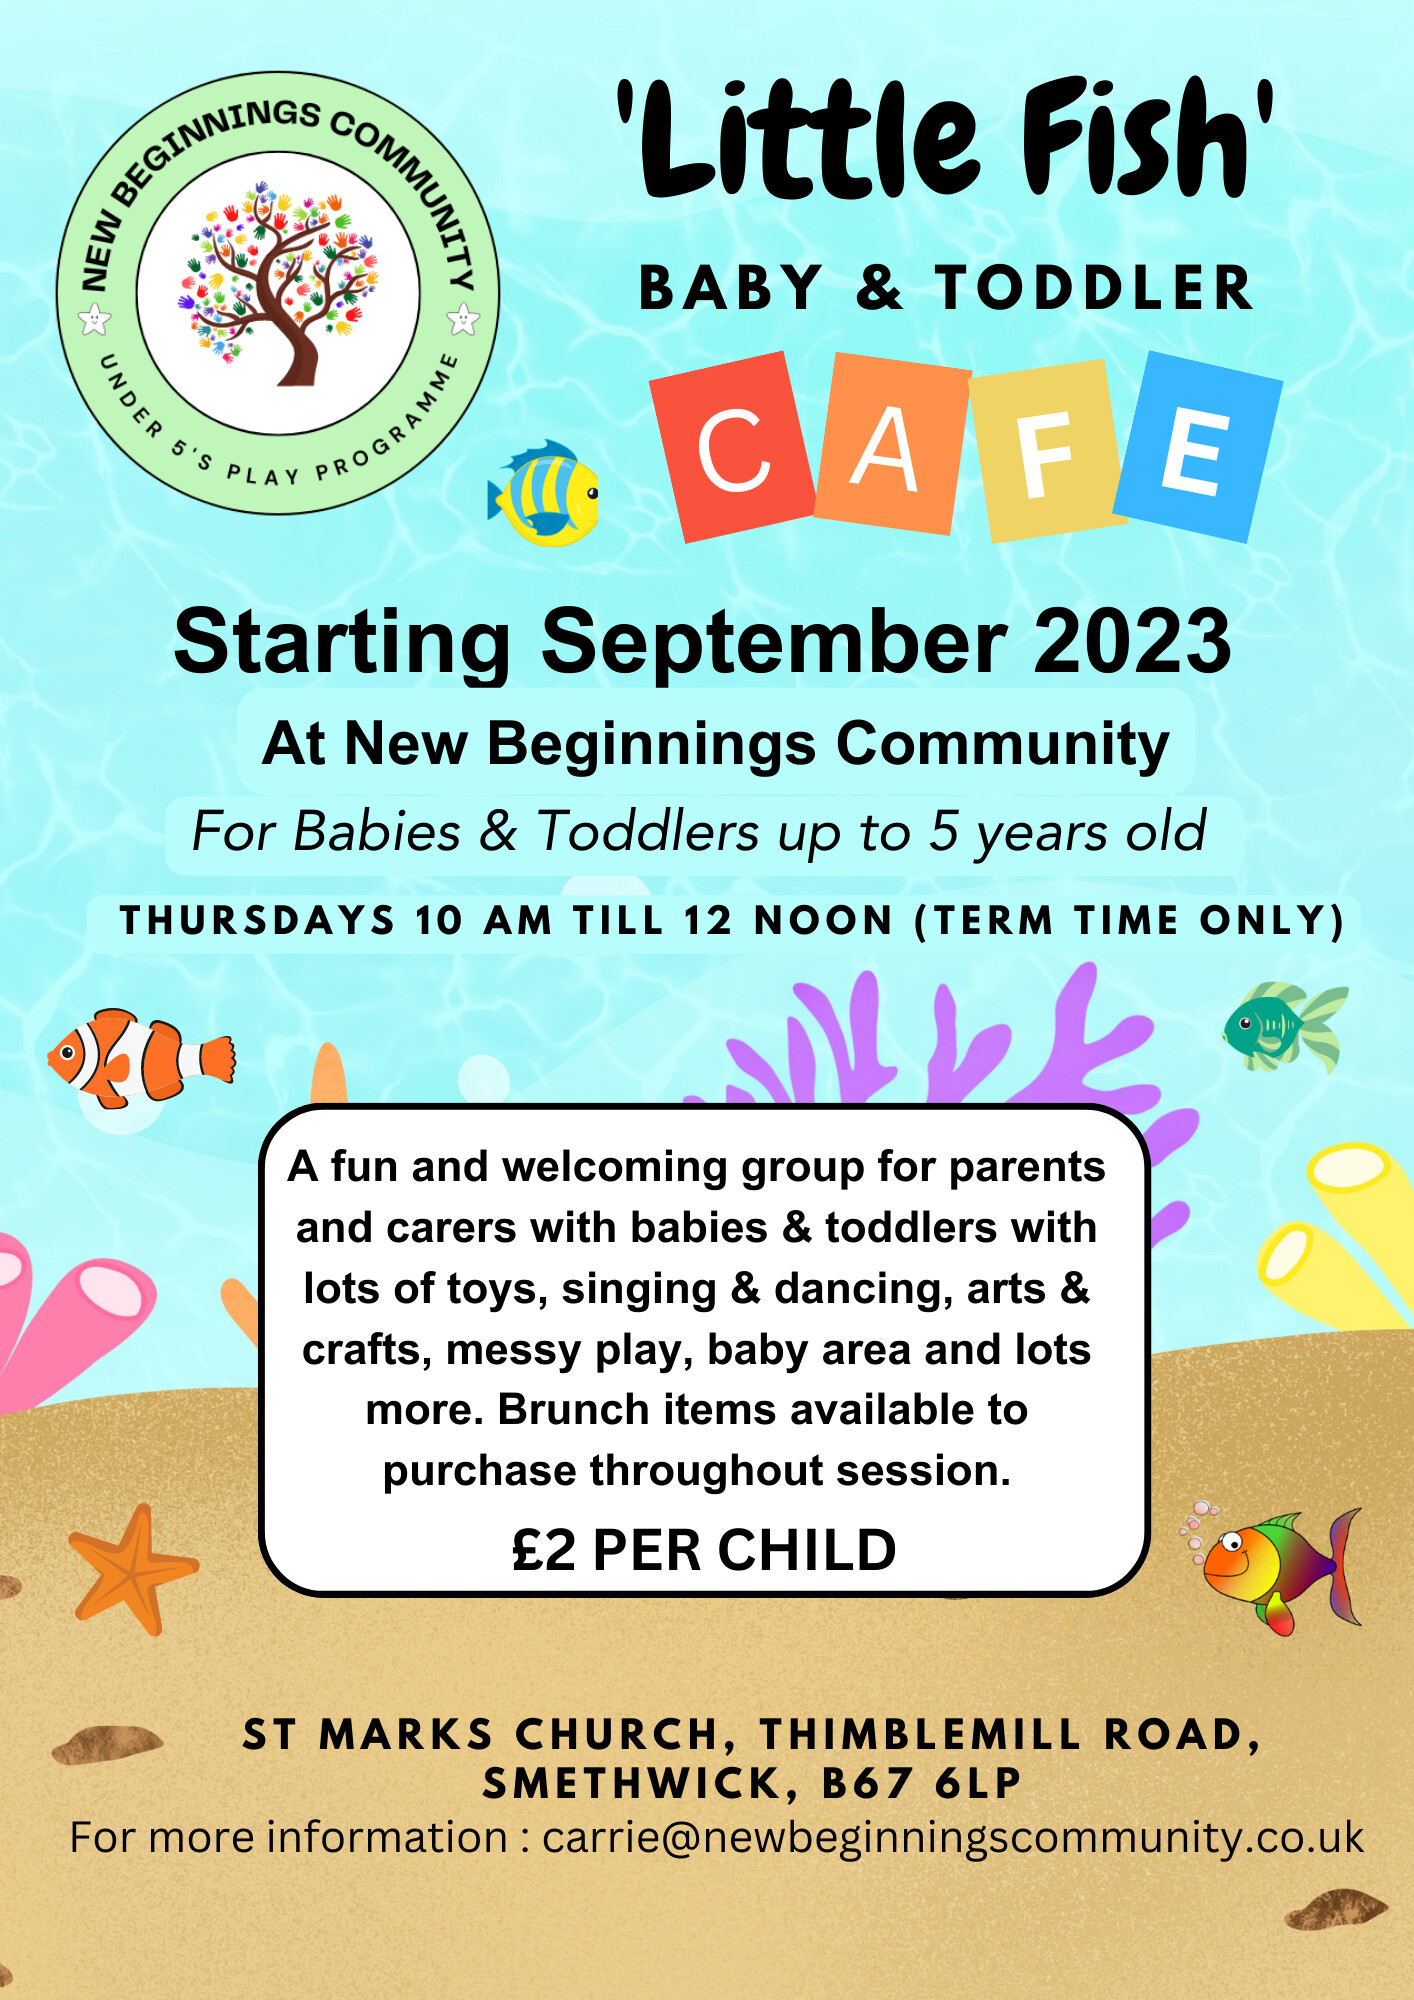 Little Fish Baby & Toddler Cafe